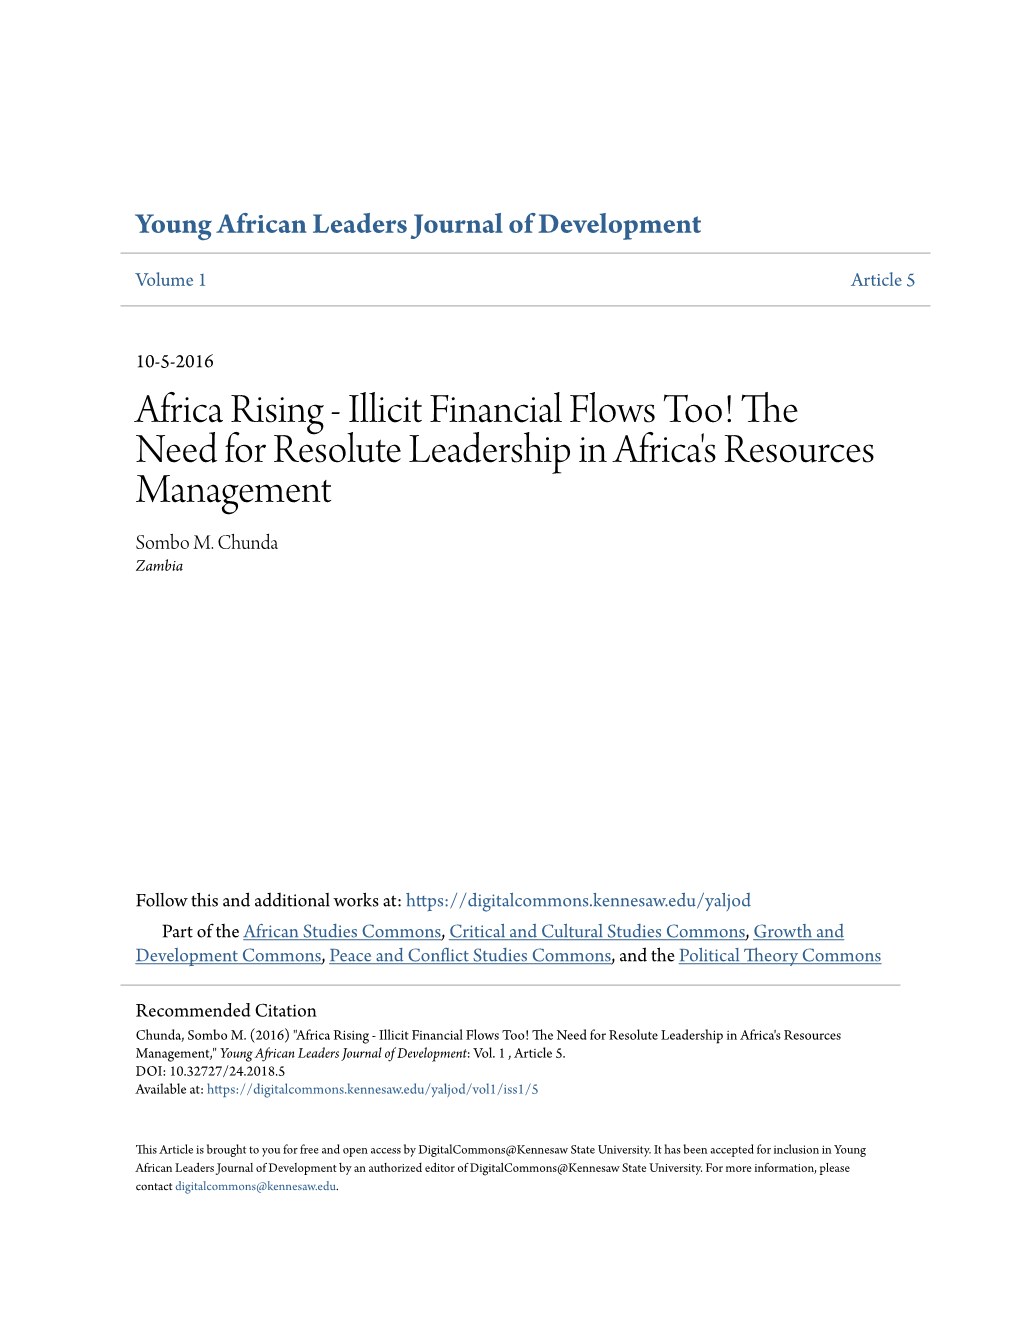 Africa Rising - Illicit Financial Flows Too! the Need for Resolute Leadership in Africa's Resources Management Sombo M